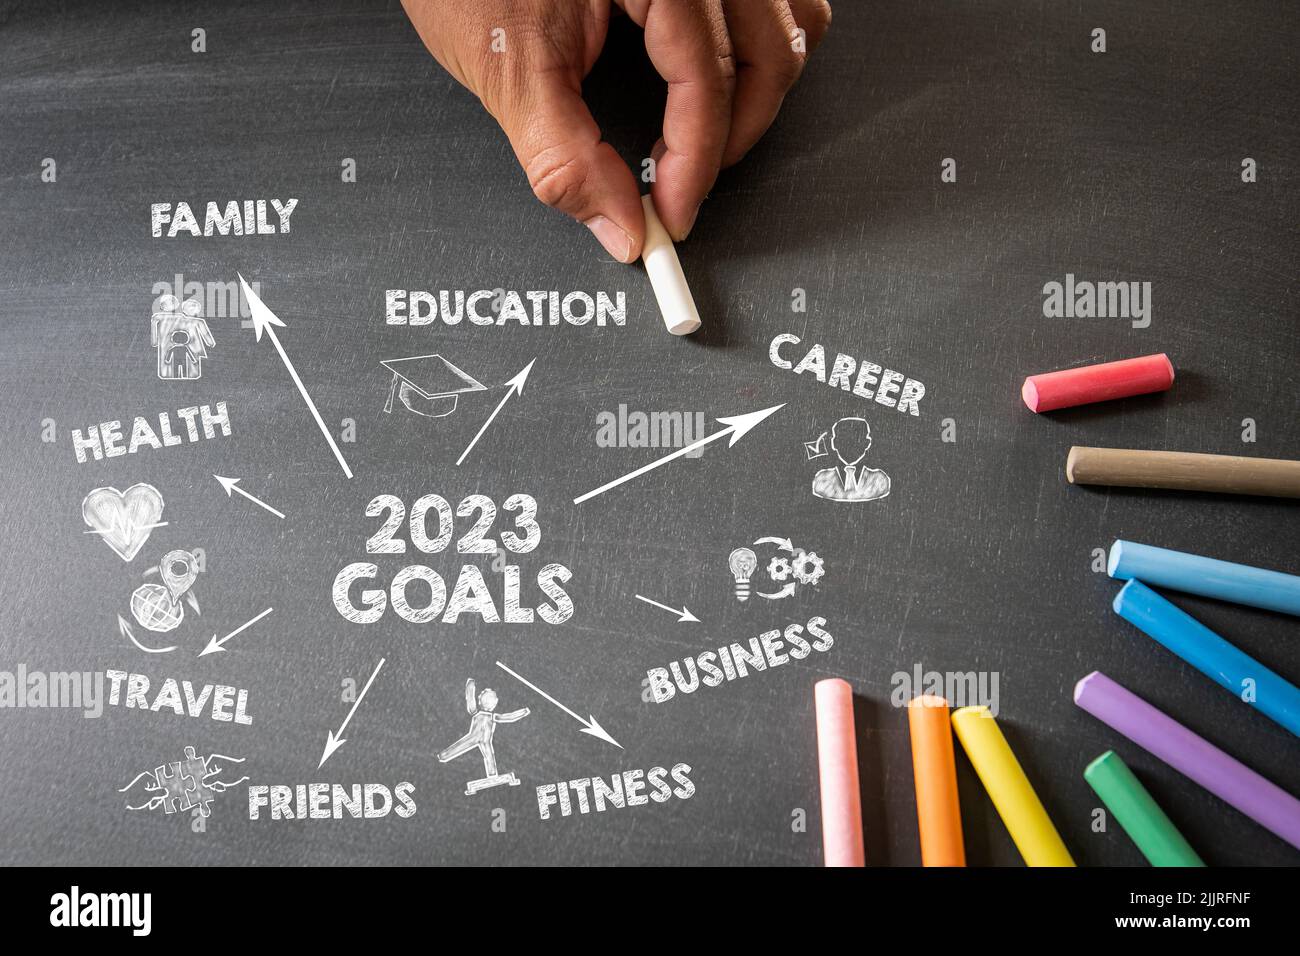 2023 Goals. Illustration, key words and icons on chalkboard. Stock Photo